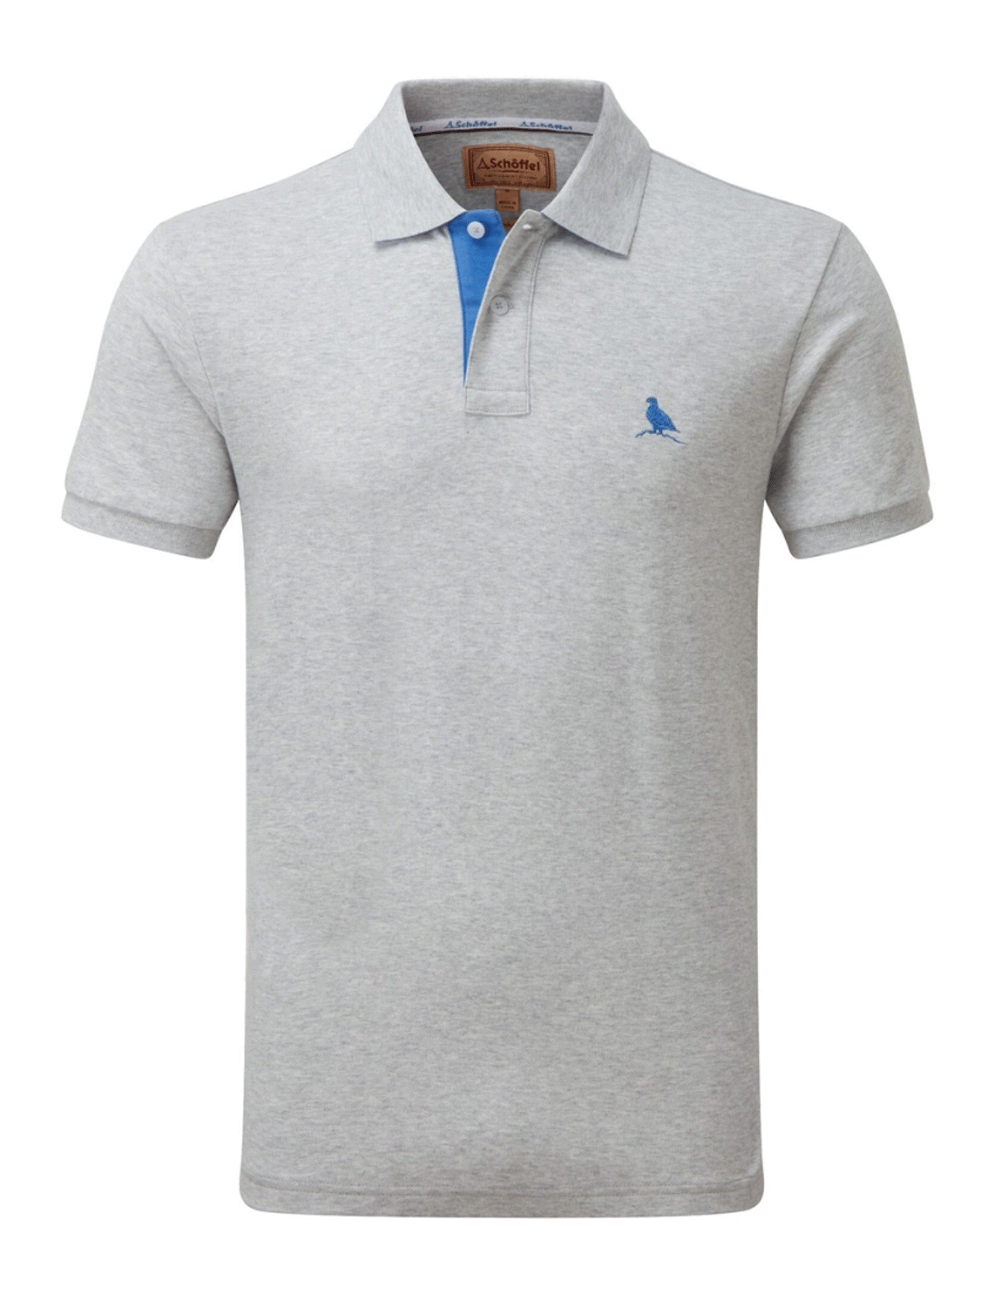 Schoffel's St. Ives Polo Shirt in Grey on a white background